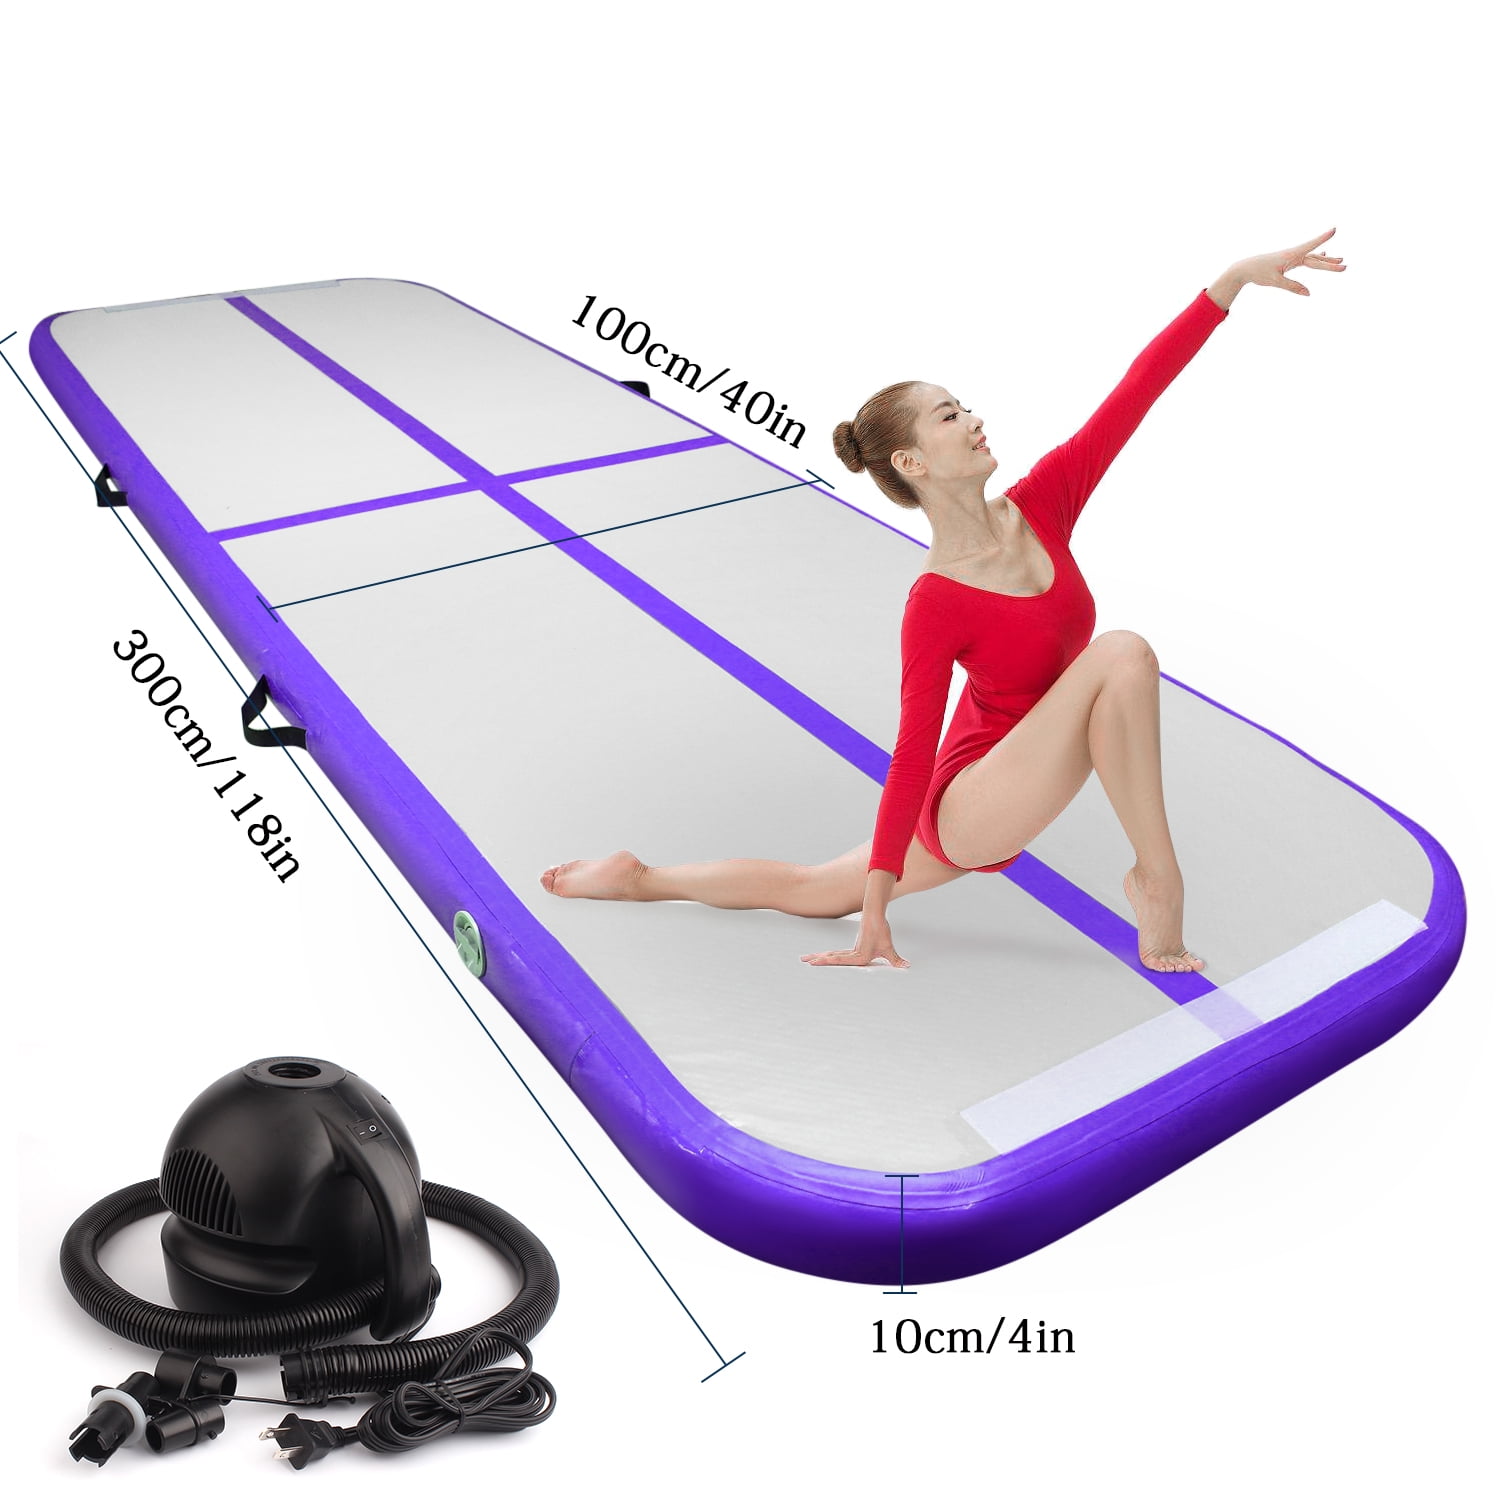 Blue, 10x 3.3x 8 Beach Inflatable Gymnastic Mat Air Track Tumbling Mat with Pump Air Floor Practice Gymnastics Cheerleading Tumbling Martial Arts for Home Use Park and Water 